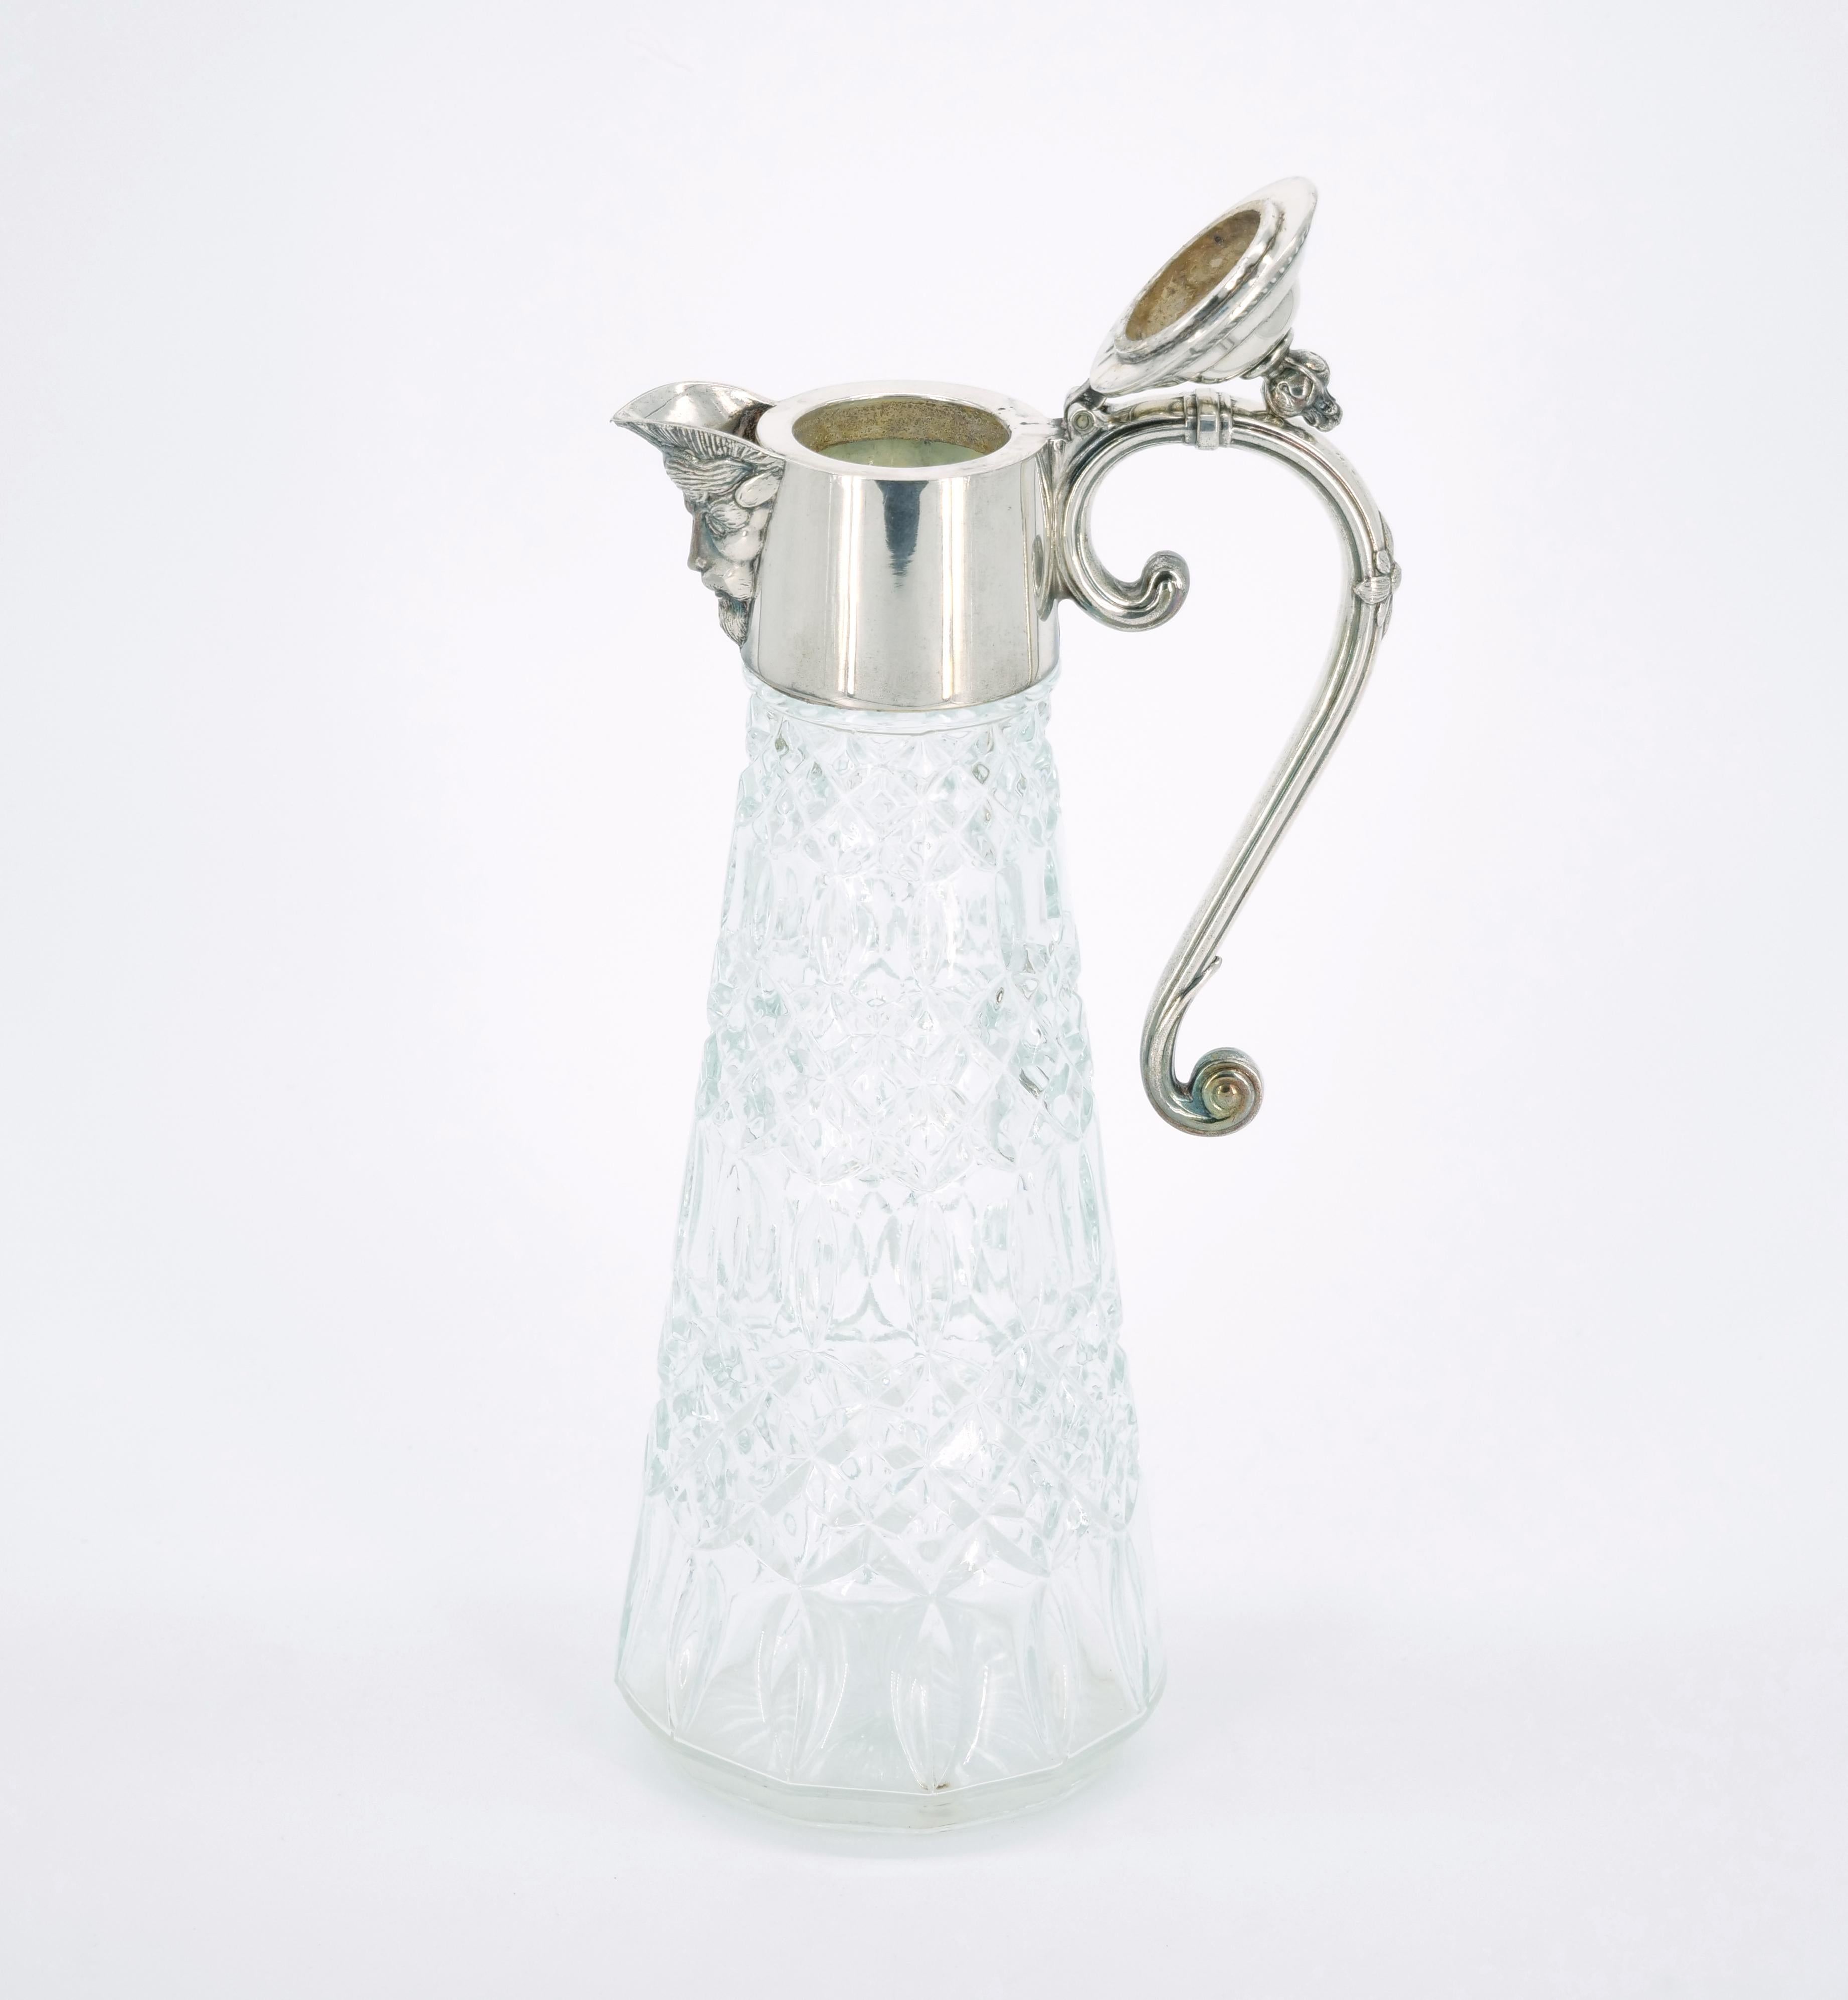 Introduce a touch of 19th-century elegance to your table or bar with this exquisite English Silver Plate and Cut Glass Claret Jug from the mid-19th century. The pitcher, designed in the Edwardian style, boasts a diamond-cut glass body, creating a